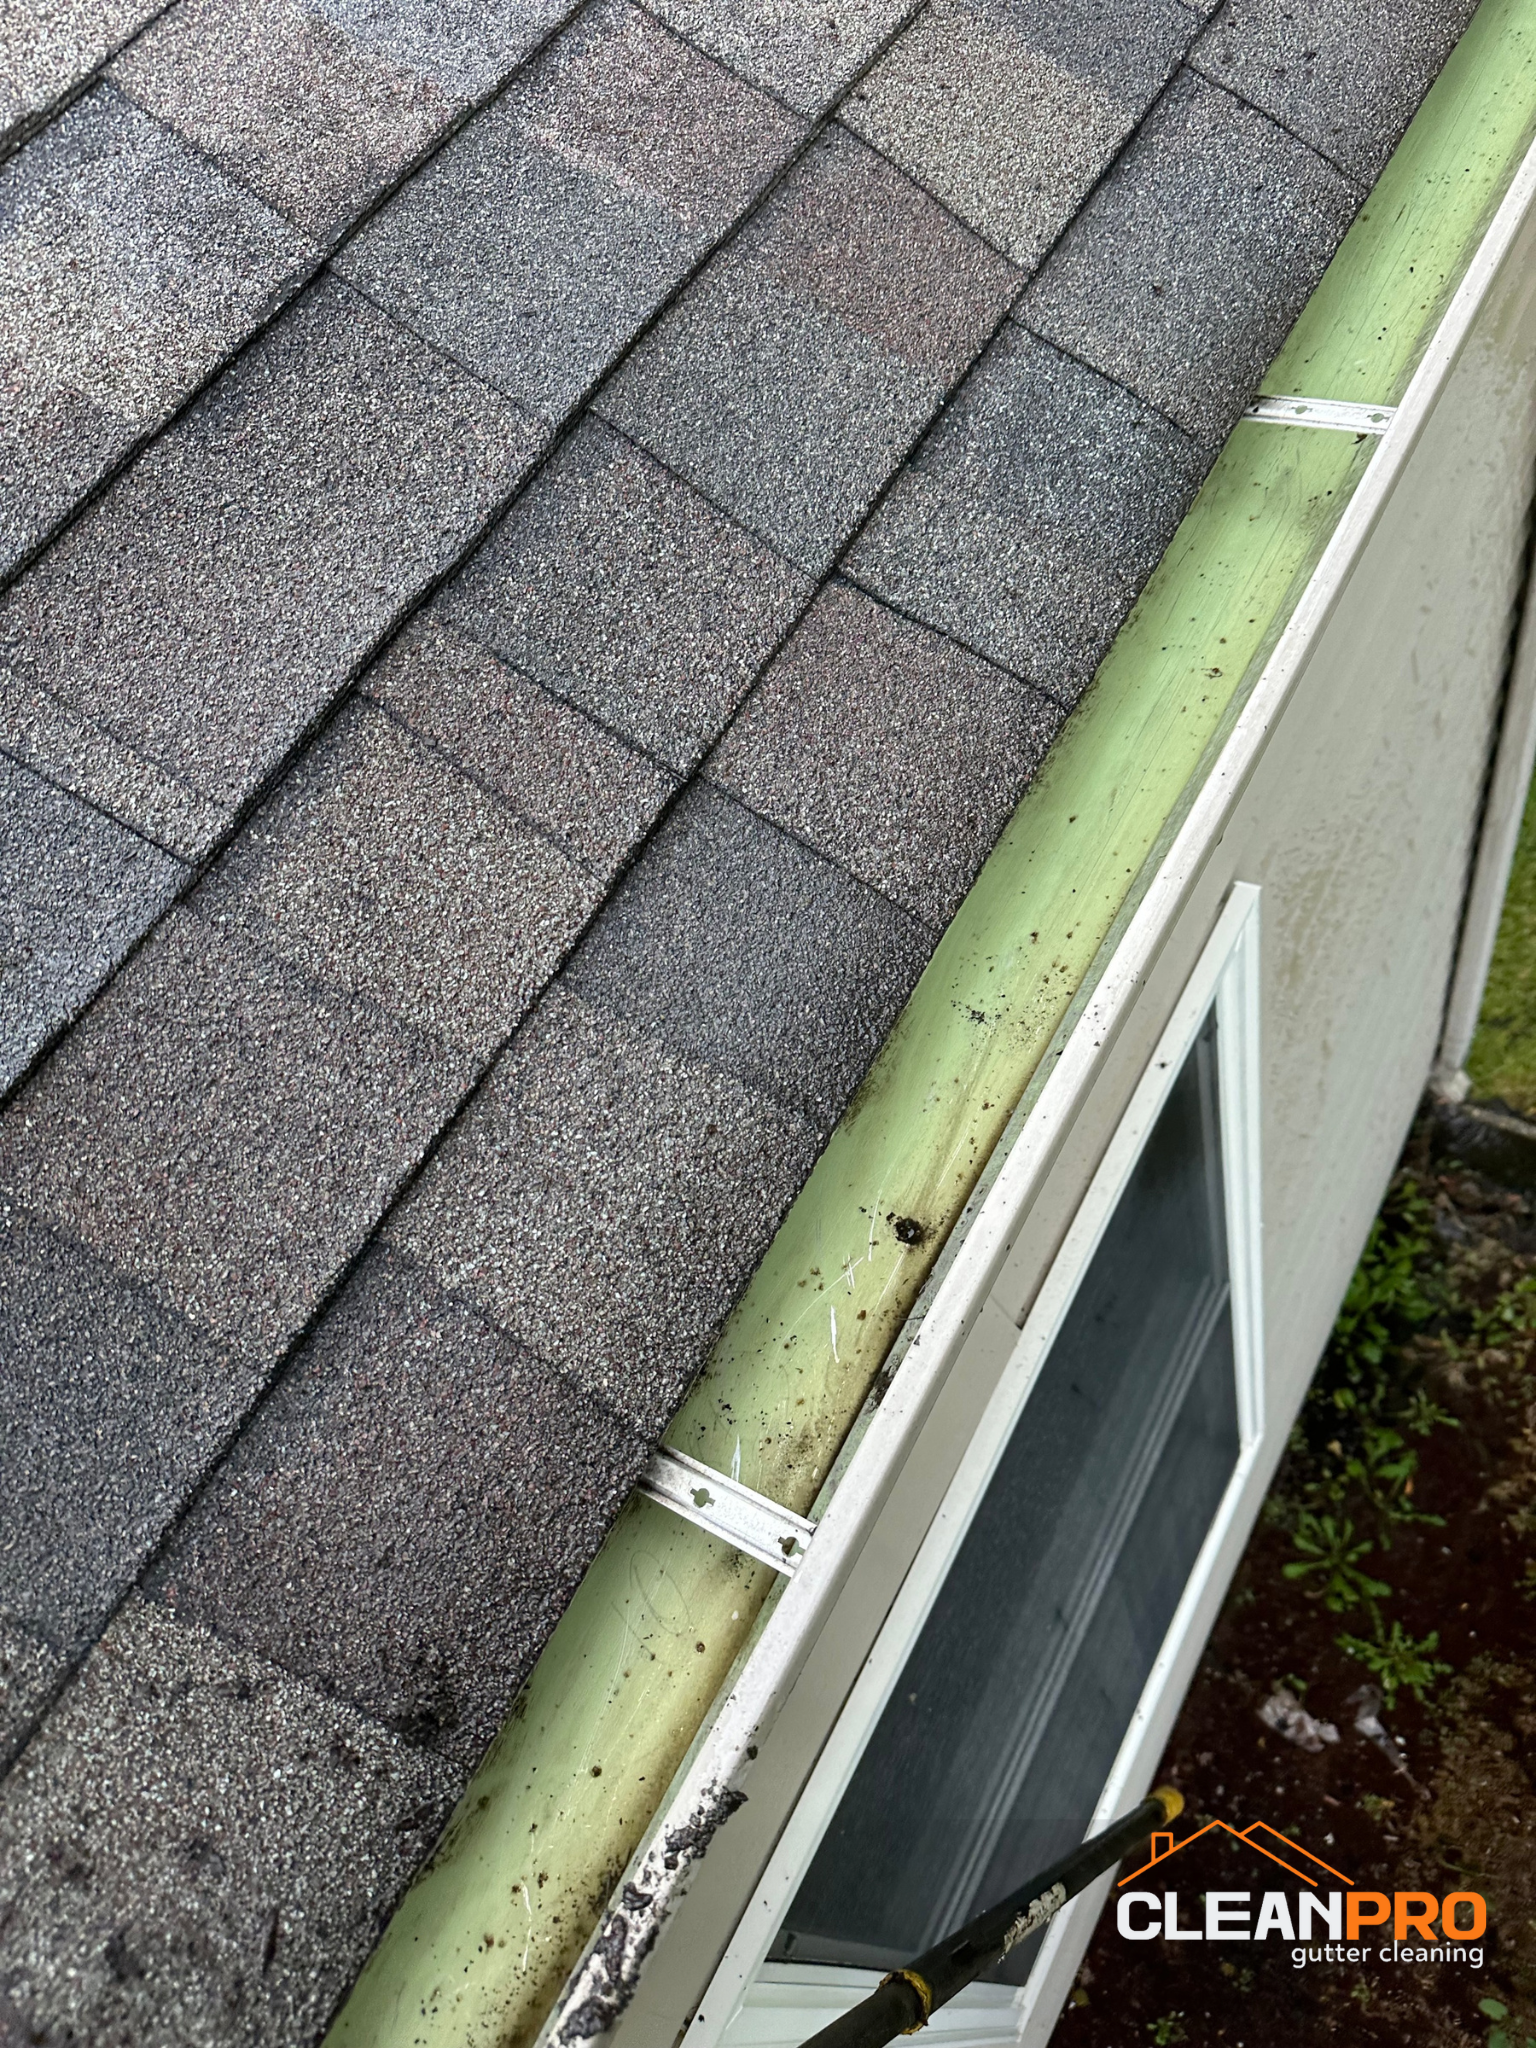 Gutter Cleaning in Houston for Anita Home